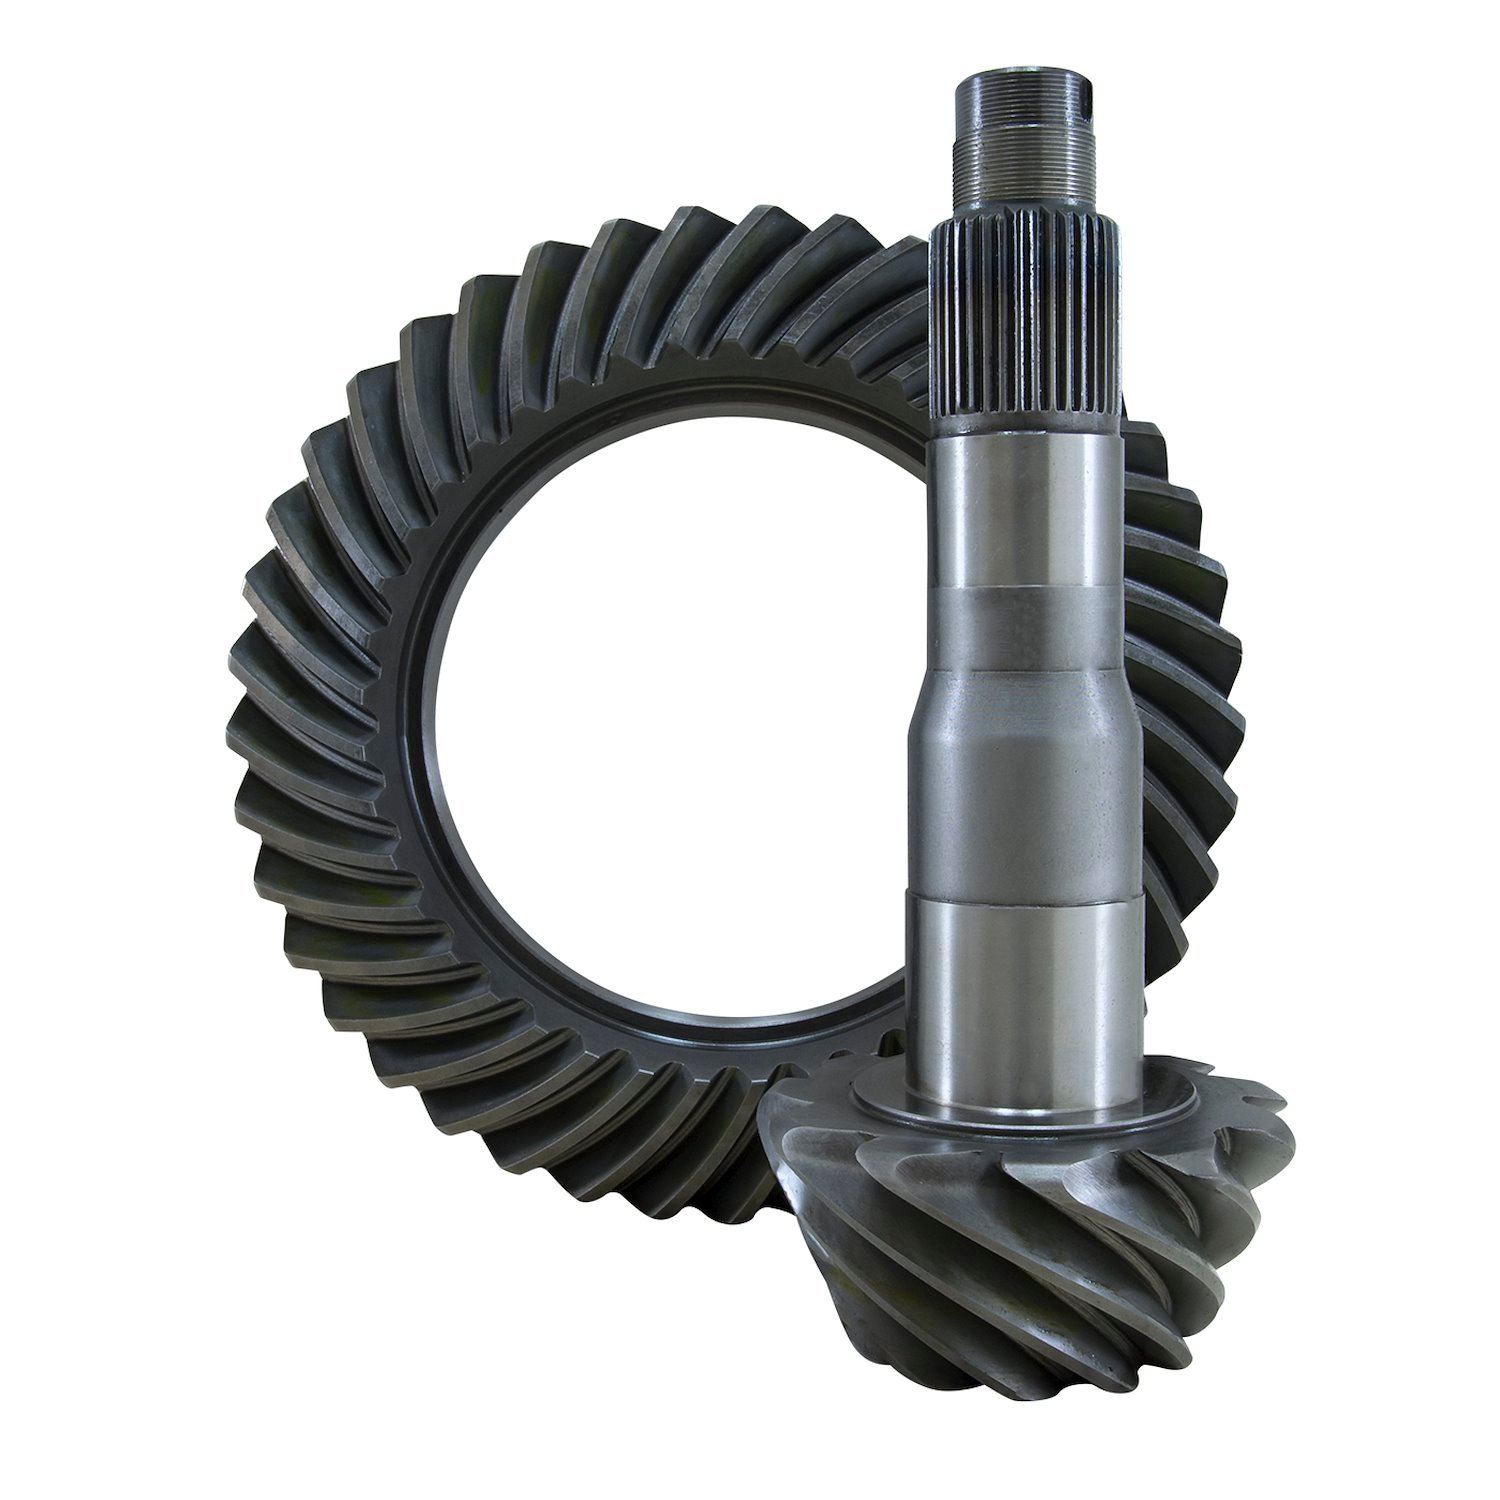 USA Standard 36345 Ring & Pinion Gear Set, For 2011 & Up Ford 10.5 in., 3.73 Ratio.